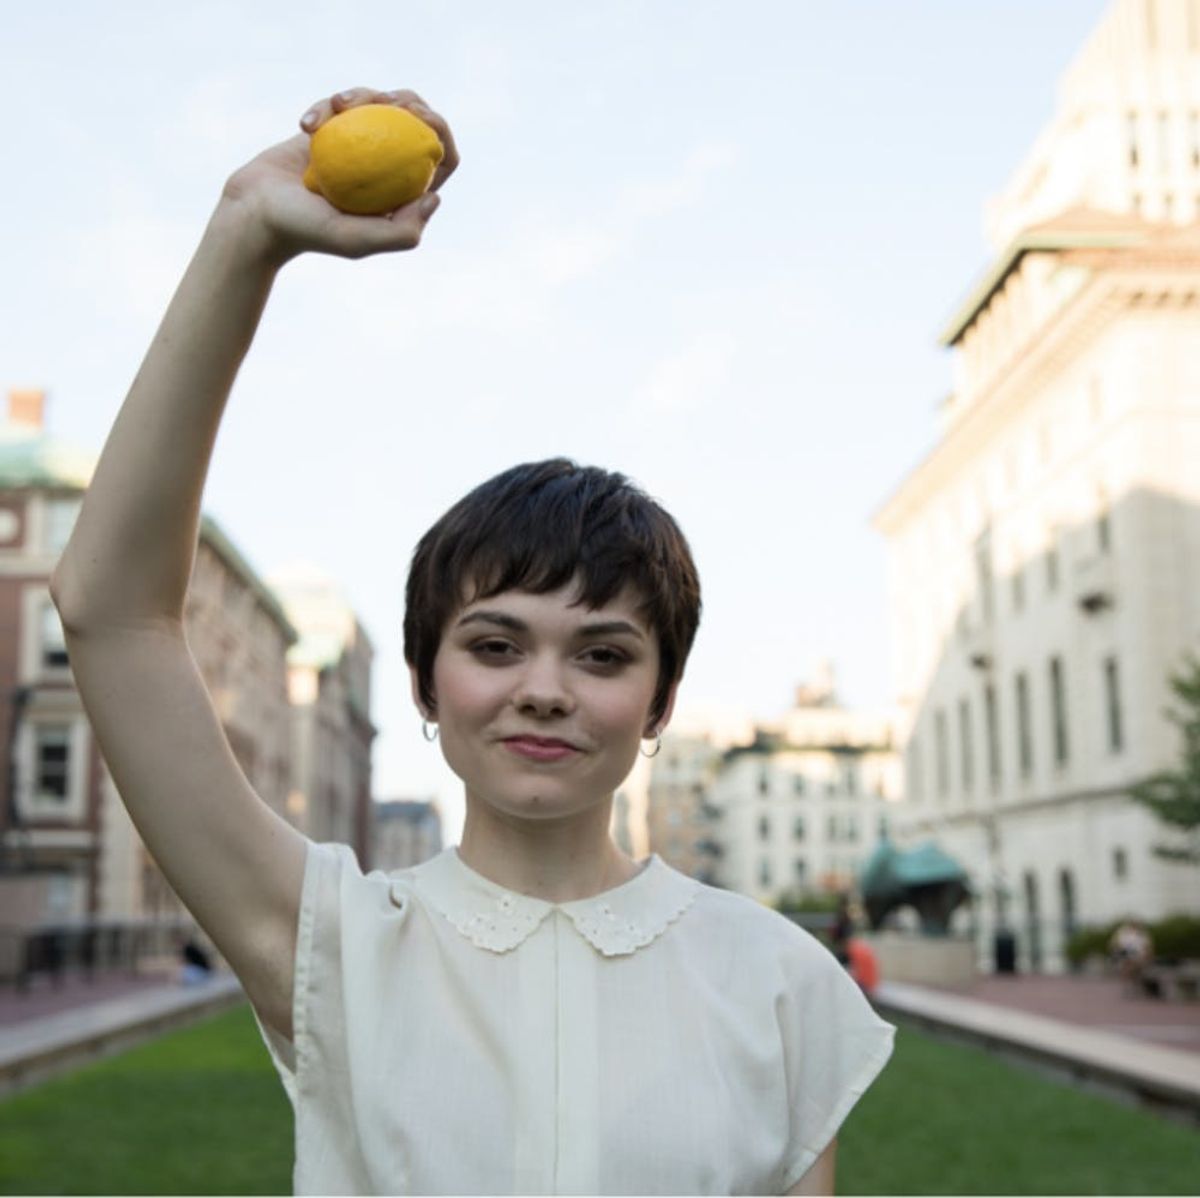 How This Teen Turned Her Lemonade Stand into a Philanthropic Empire